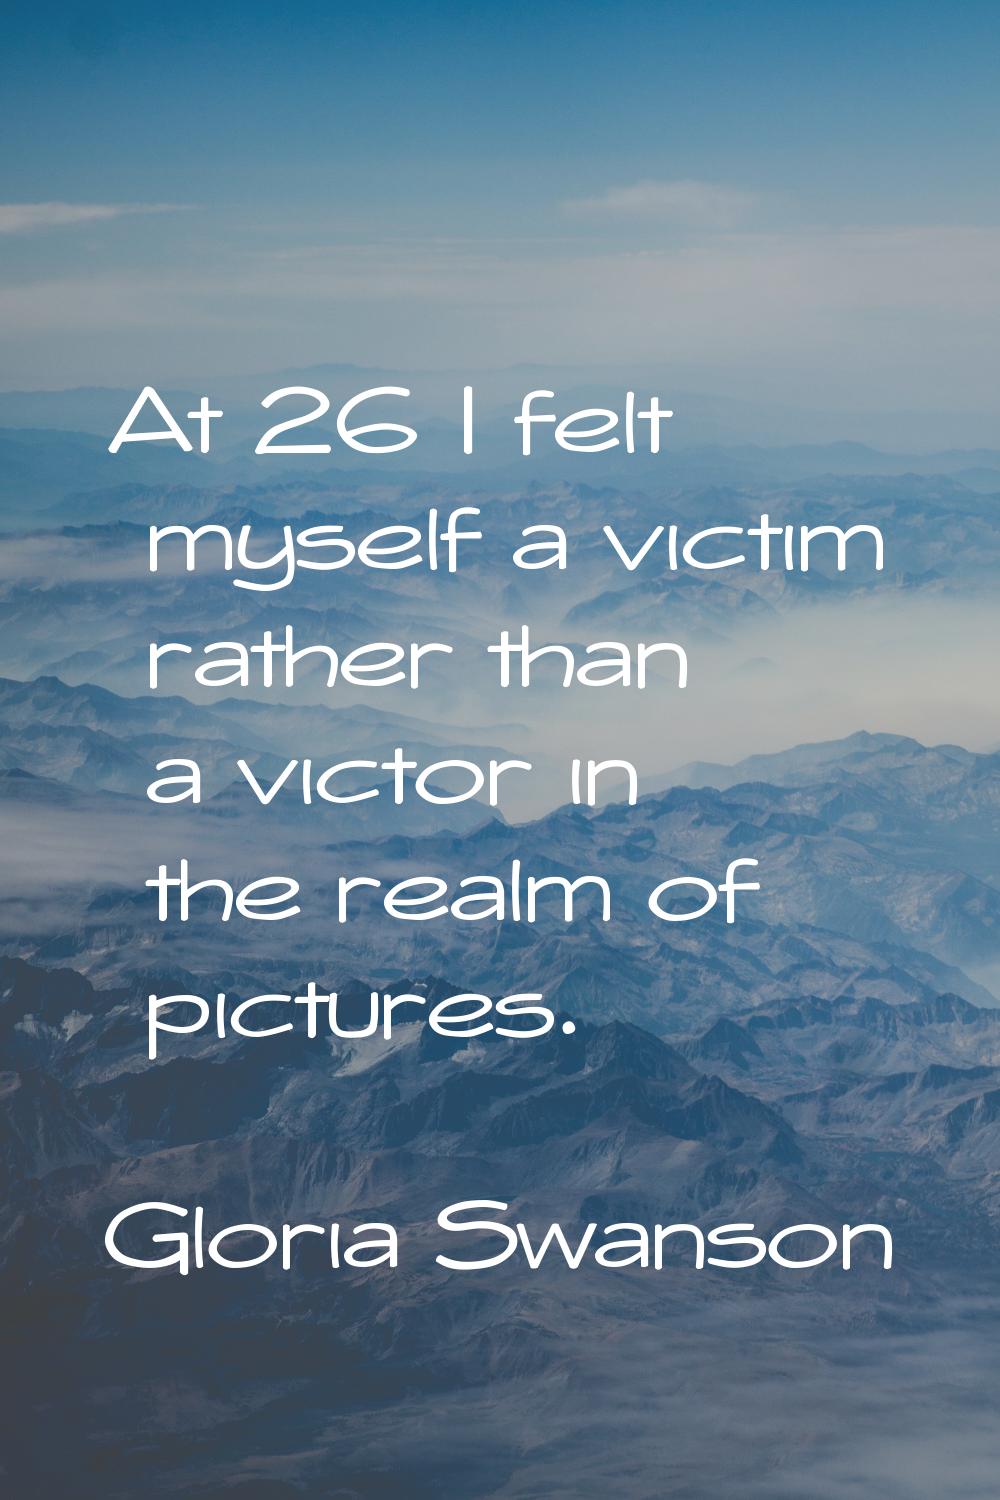 At 26 I felt myself a victim rather than a victor in the realm of pictures.